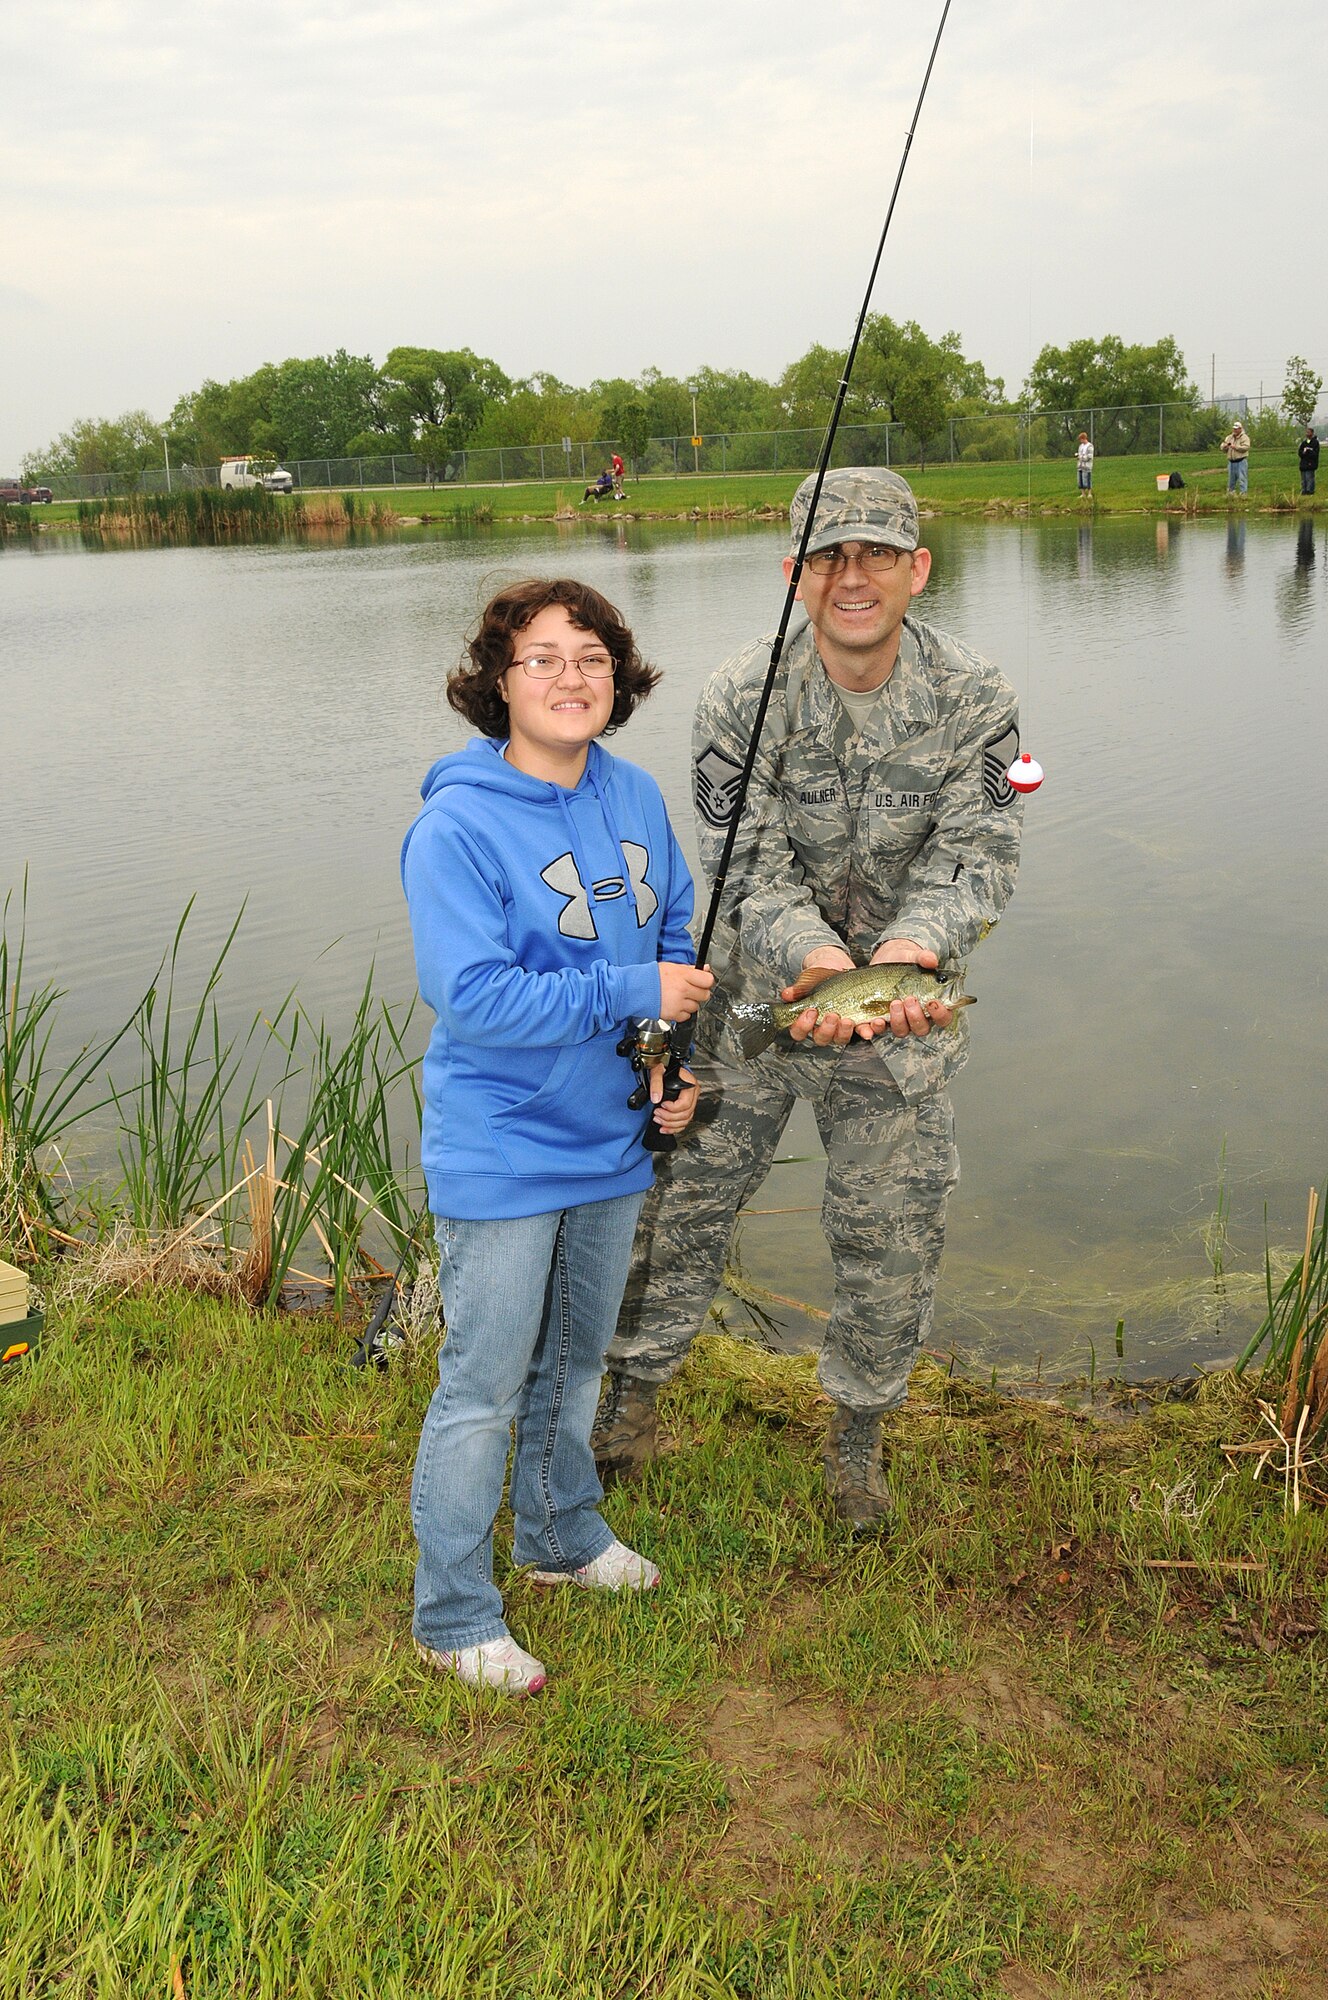 Rachel, (left) a senior at Lincoln Northstar High school enrolled in the Functional Community Reference program, and her fishing buddy Master Sgt. Aaron Aulner, 155th Air Refueling Wing Prime Ribs manager, show off a fish they caught on May 20, 2011 during the annual "Gators Gone Fishin". This is the second year Rachel and Master Sgt. Aulner paired together to catch fish and enjoy the event. (Nebraska Air National Guard photo by Senior Master Sgt. Lee Straube)